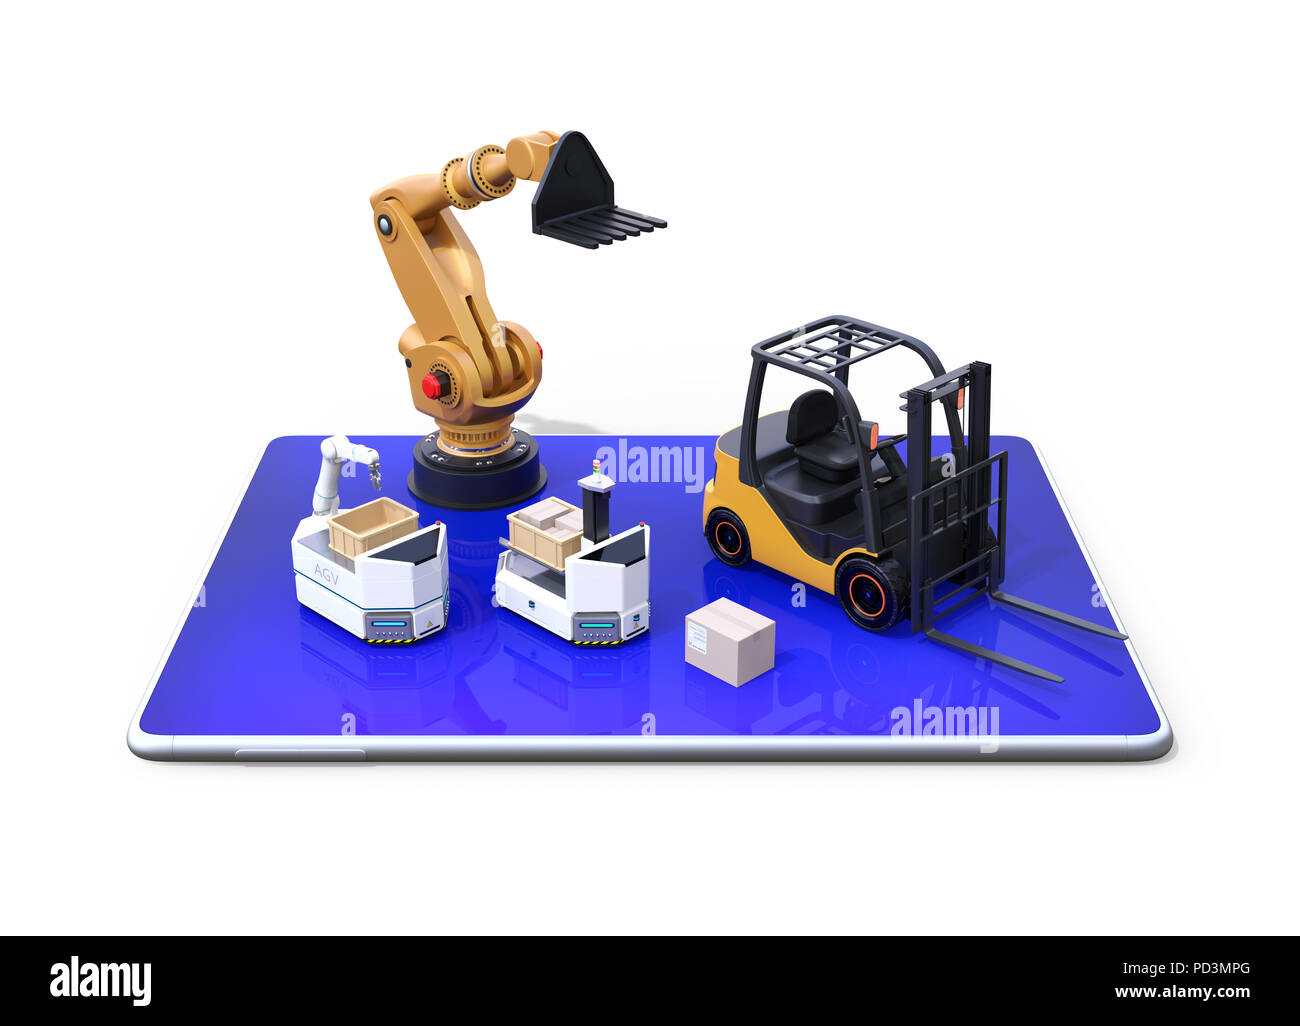 Electric forklift, AGV and industrial robot on tablet PC. White background. Factory automation concept. 3D rendering image. Stock Photo